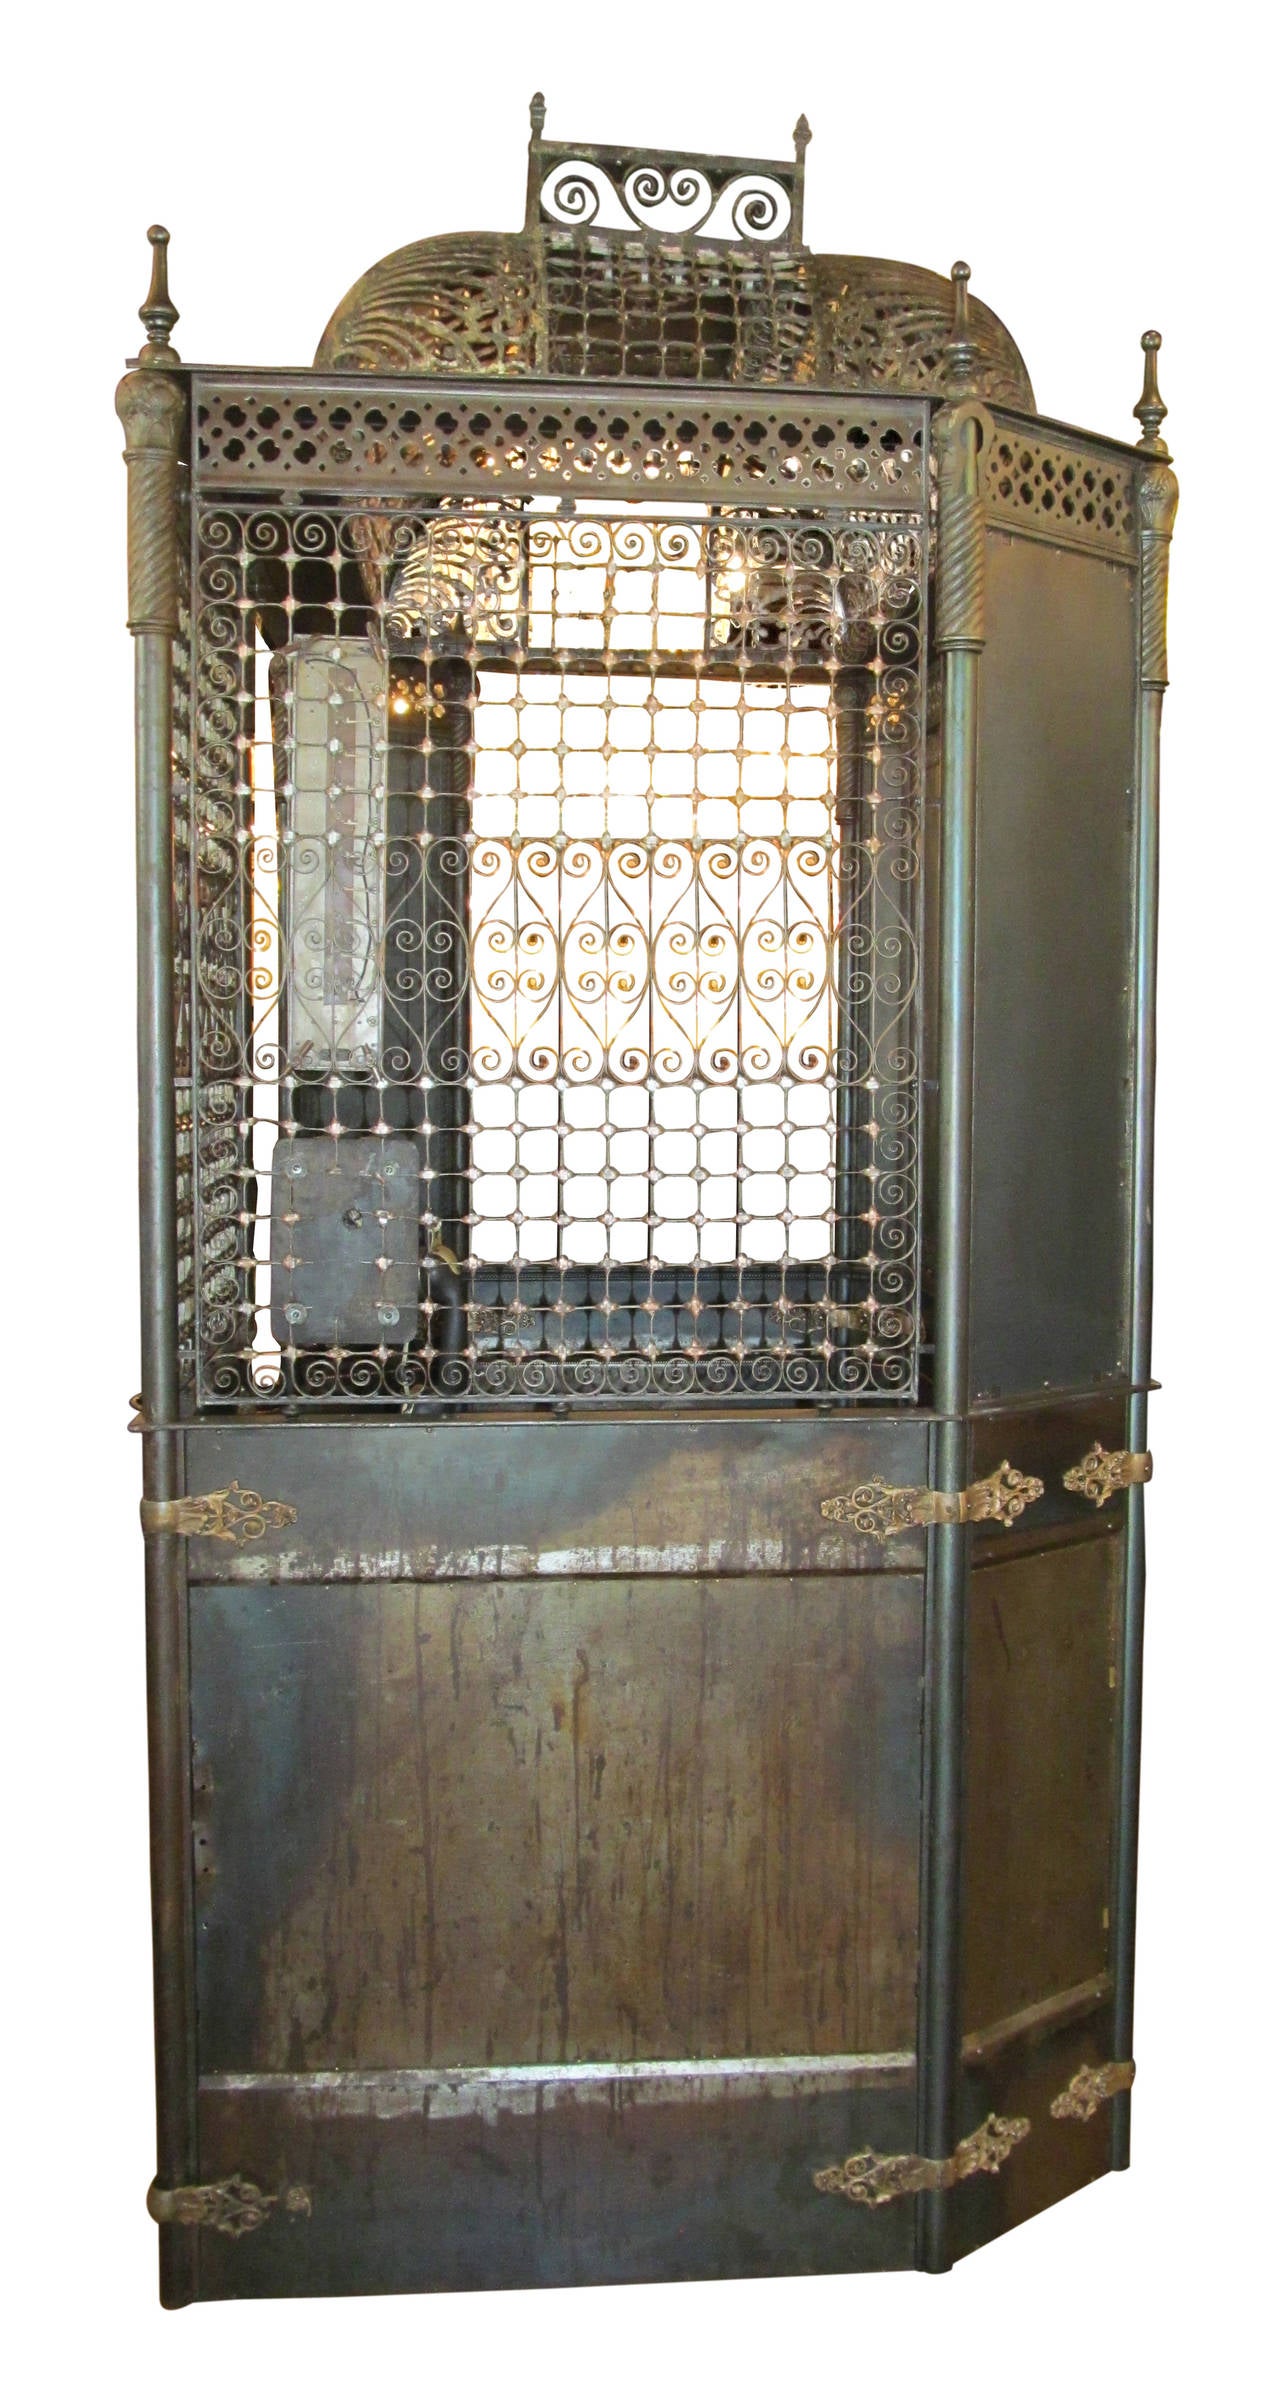 Gorgeous antique 'Otis Elevator' birdcage elevator cage from 135 5th Ave. NYC. This item is located at our 149 Madison Ave, New York, NY location.